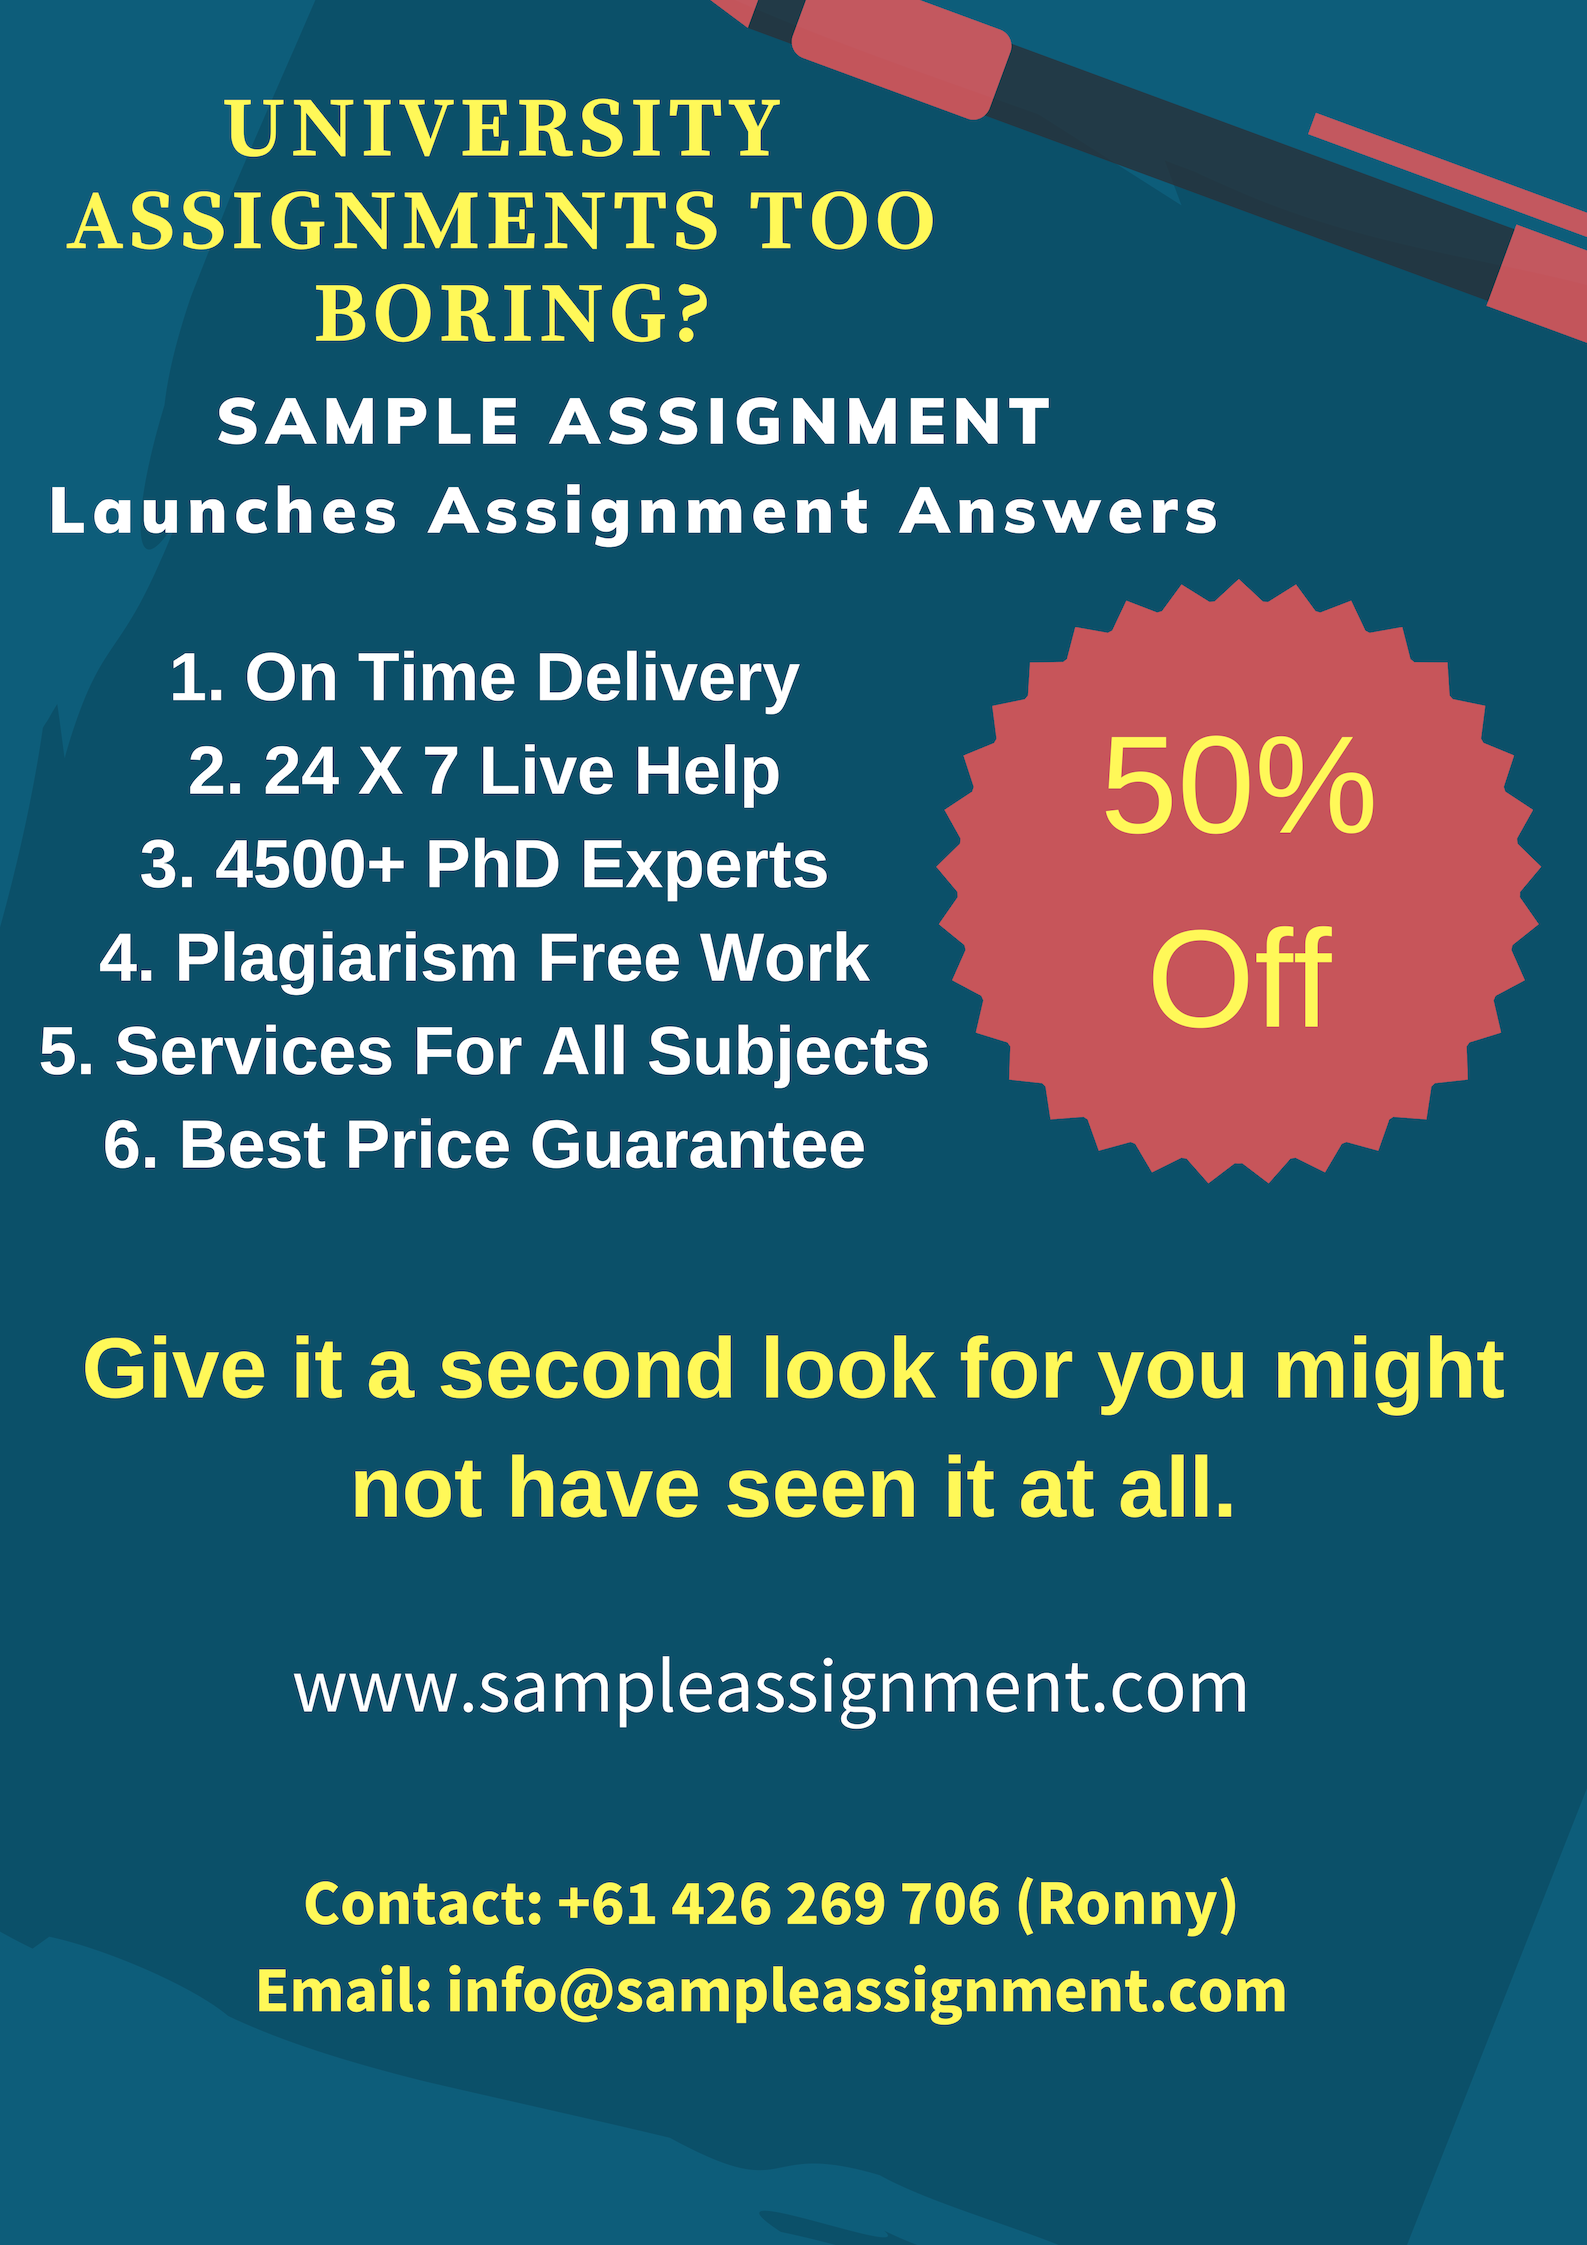 SAMPLE ASSIGNMENT - Launches Assignment Offers